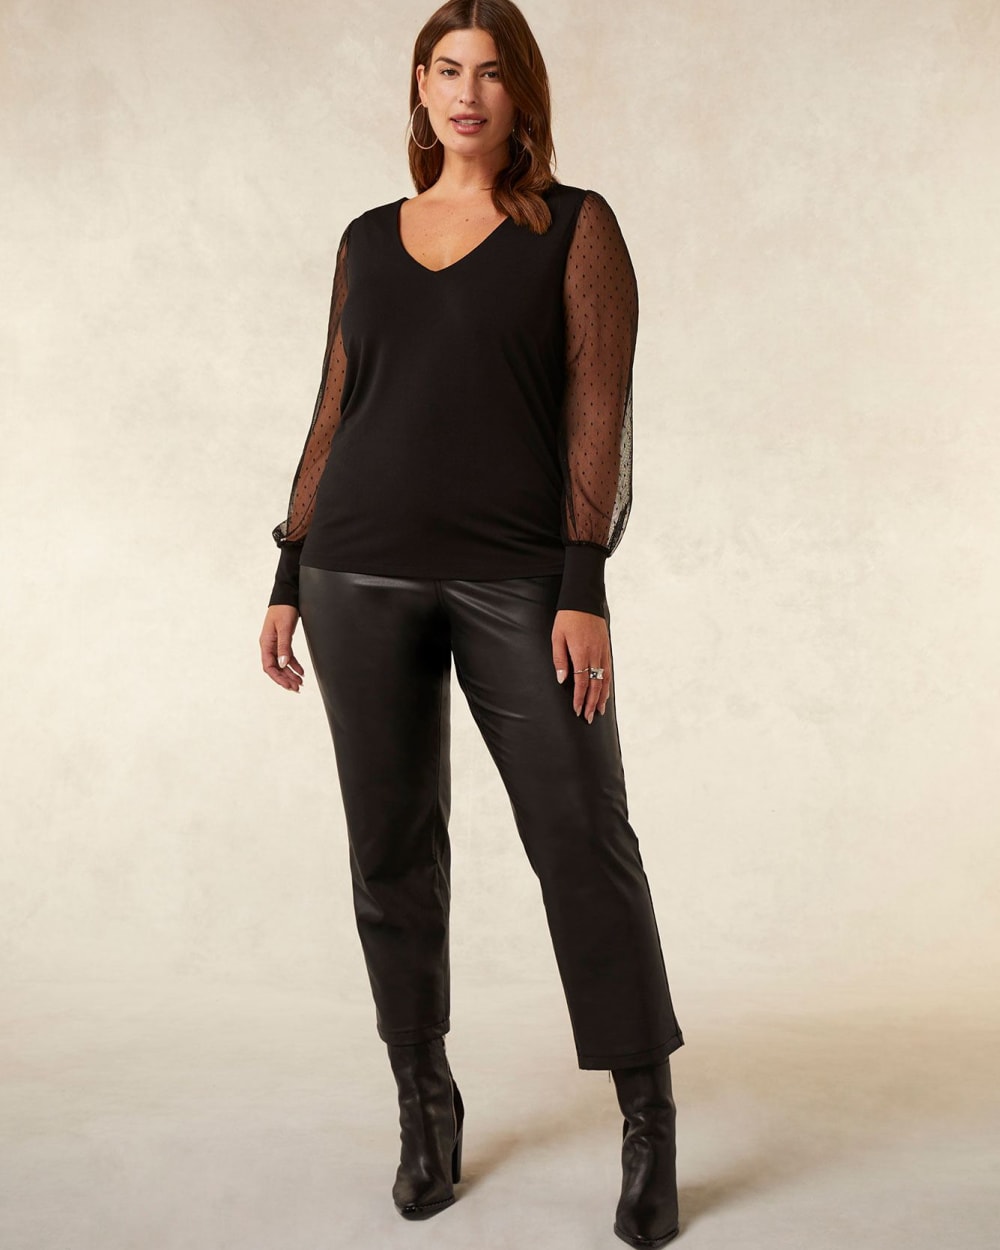 V-Neck Top with Long Mesh Sleeves - Addition Elle